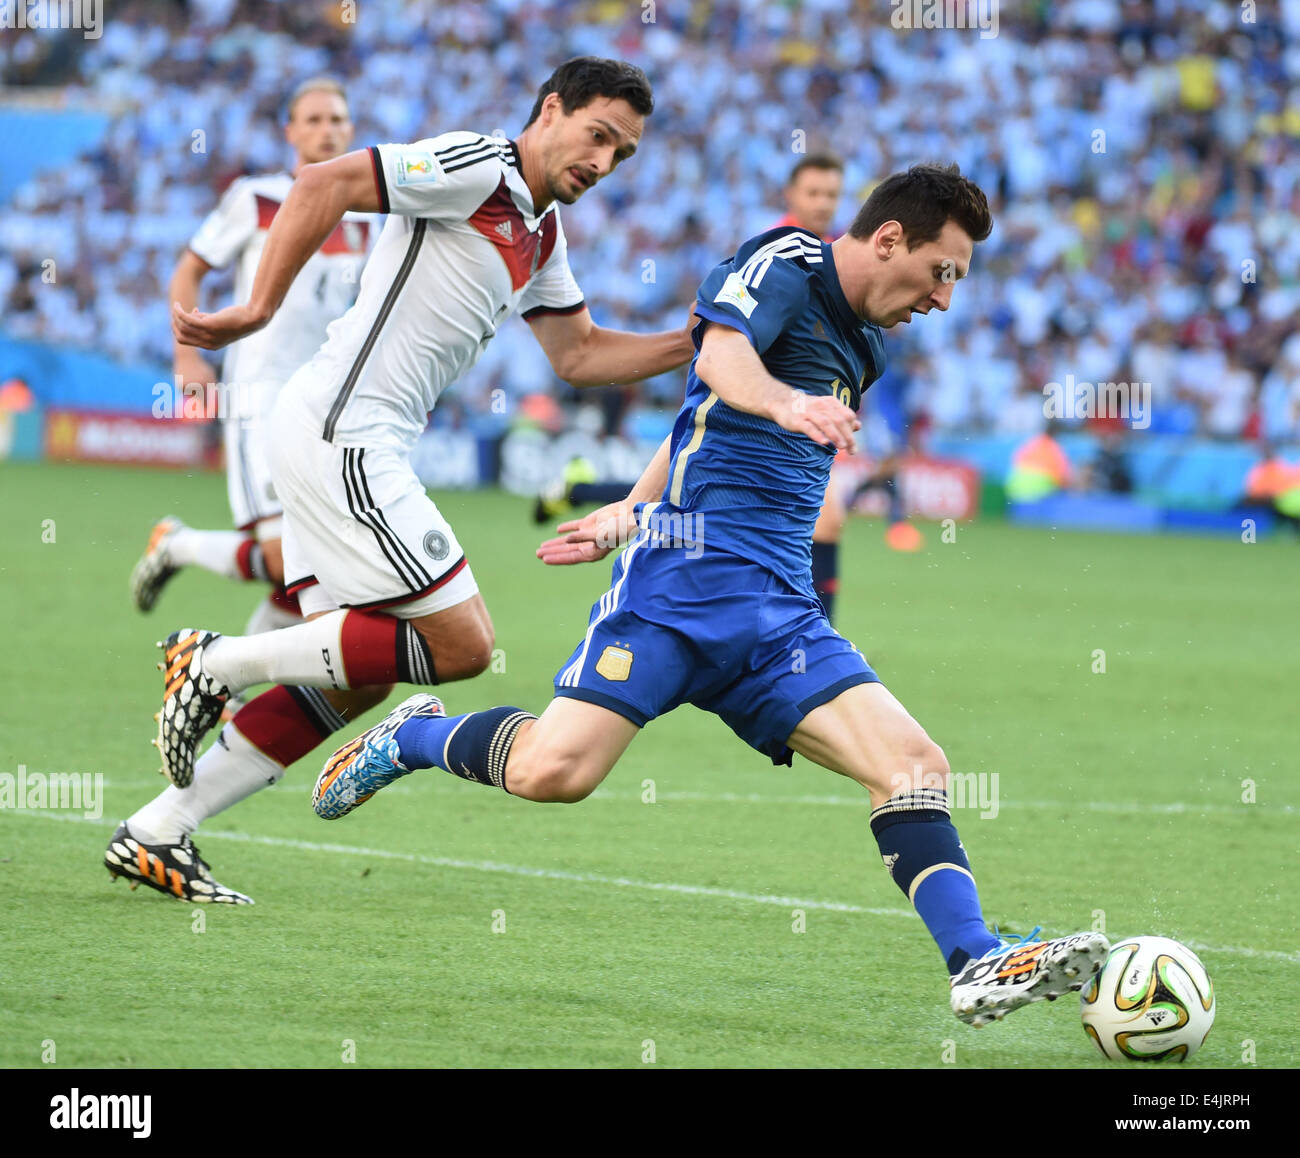 Rio De Janeiro, Brazil. 13th July, 2014. Argentina's Lionel Messi (R) runs with the ball during the final match between Germany and Argentina of 2014 FIFA World Cup at the Estadio do Maracana Stadium in Rio de Janeiro, Brazil, on July 13, 2014. Credit:  Liu Dawei/Xinhua/Alamy Live News Stock Photo